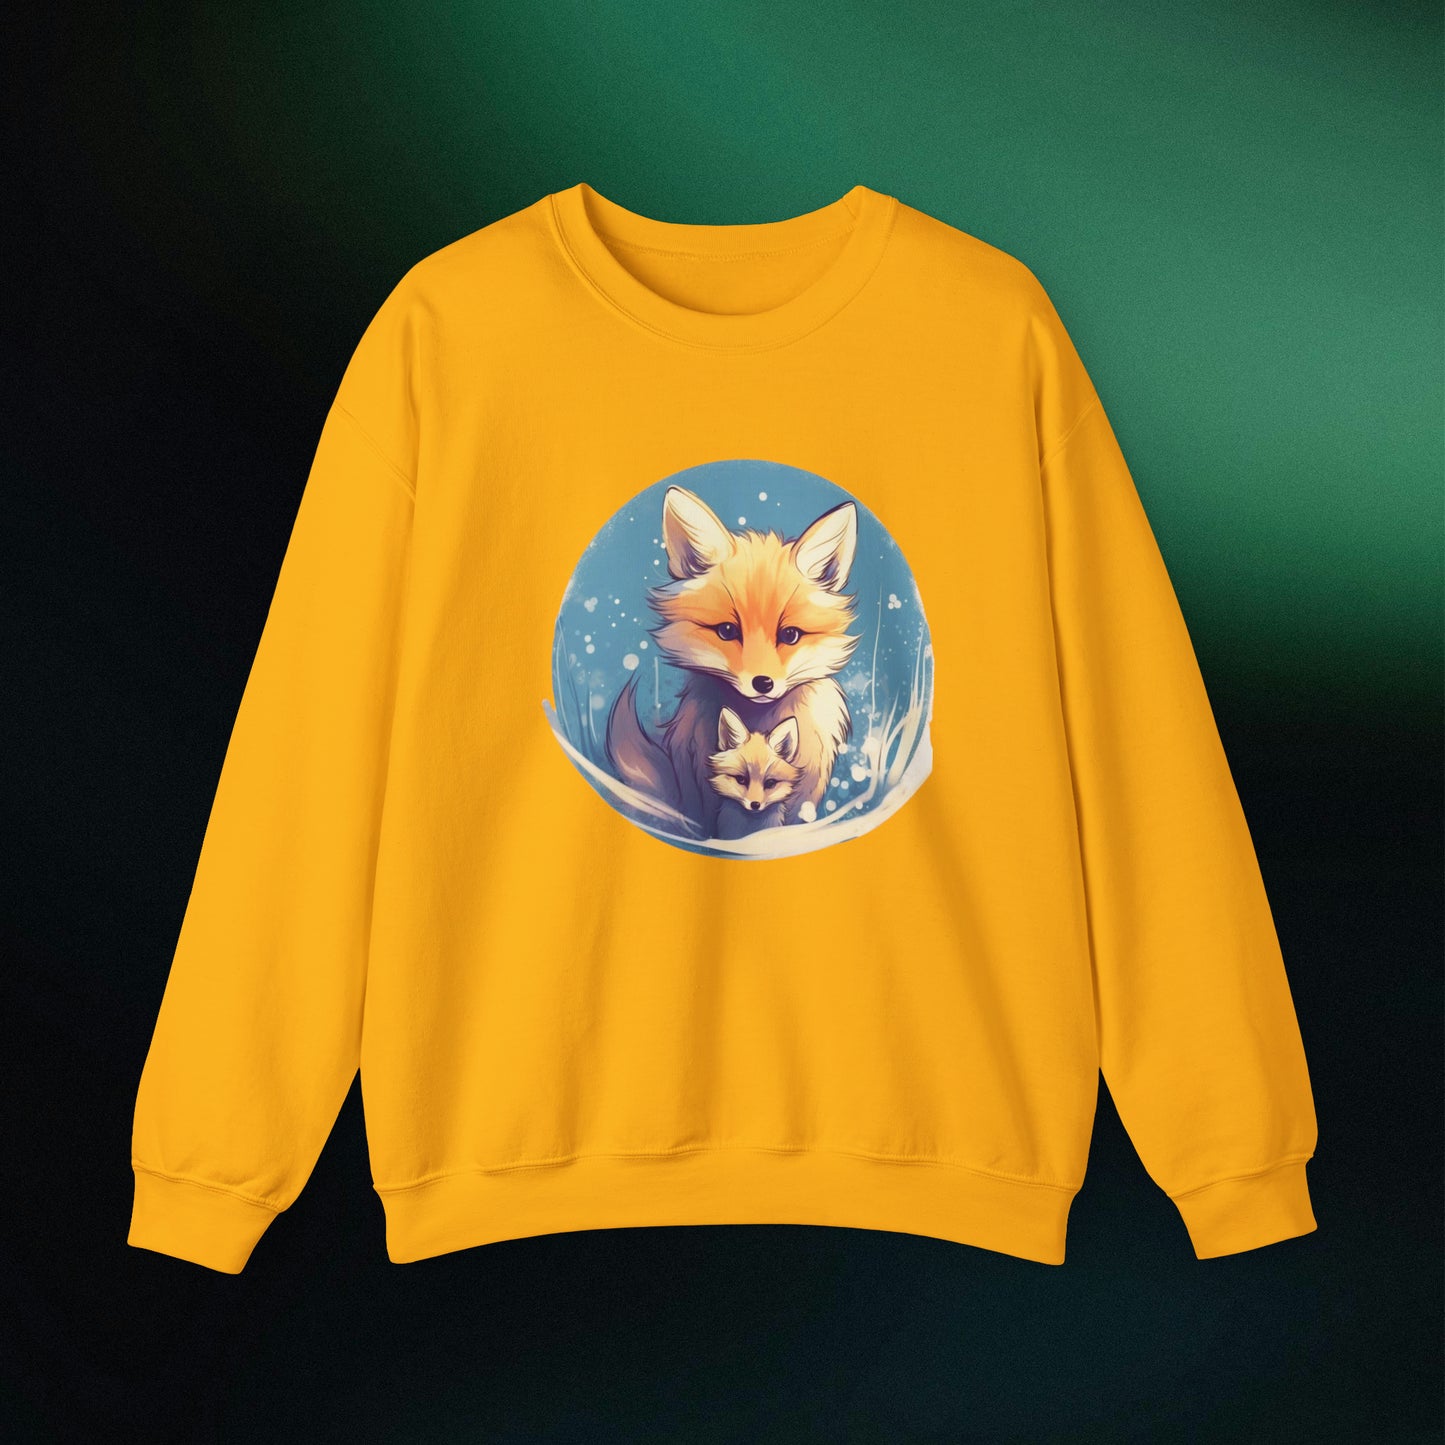 Vintage Forest Witch Aesthetic Sweatshirt - Cozy Fox Cottagecore Sweater with Mommy and Baby Fox Design Sweatshirt S Gold 